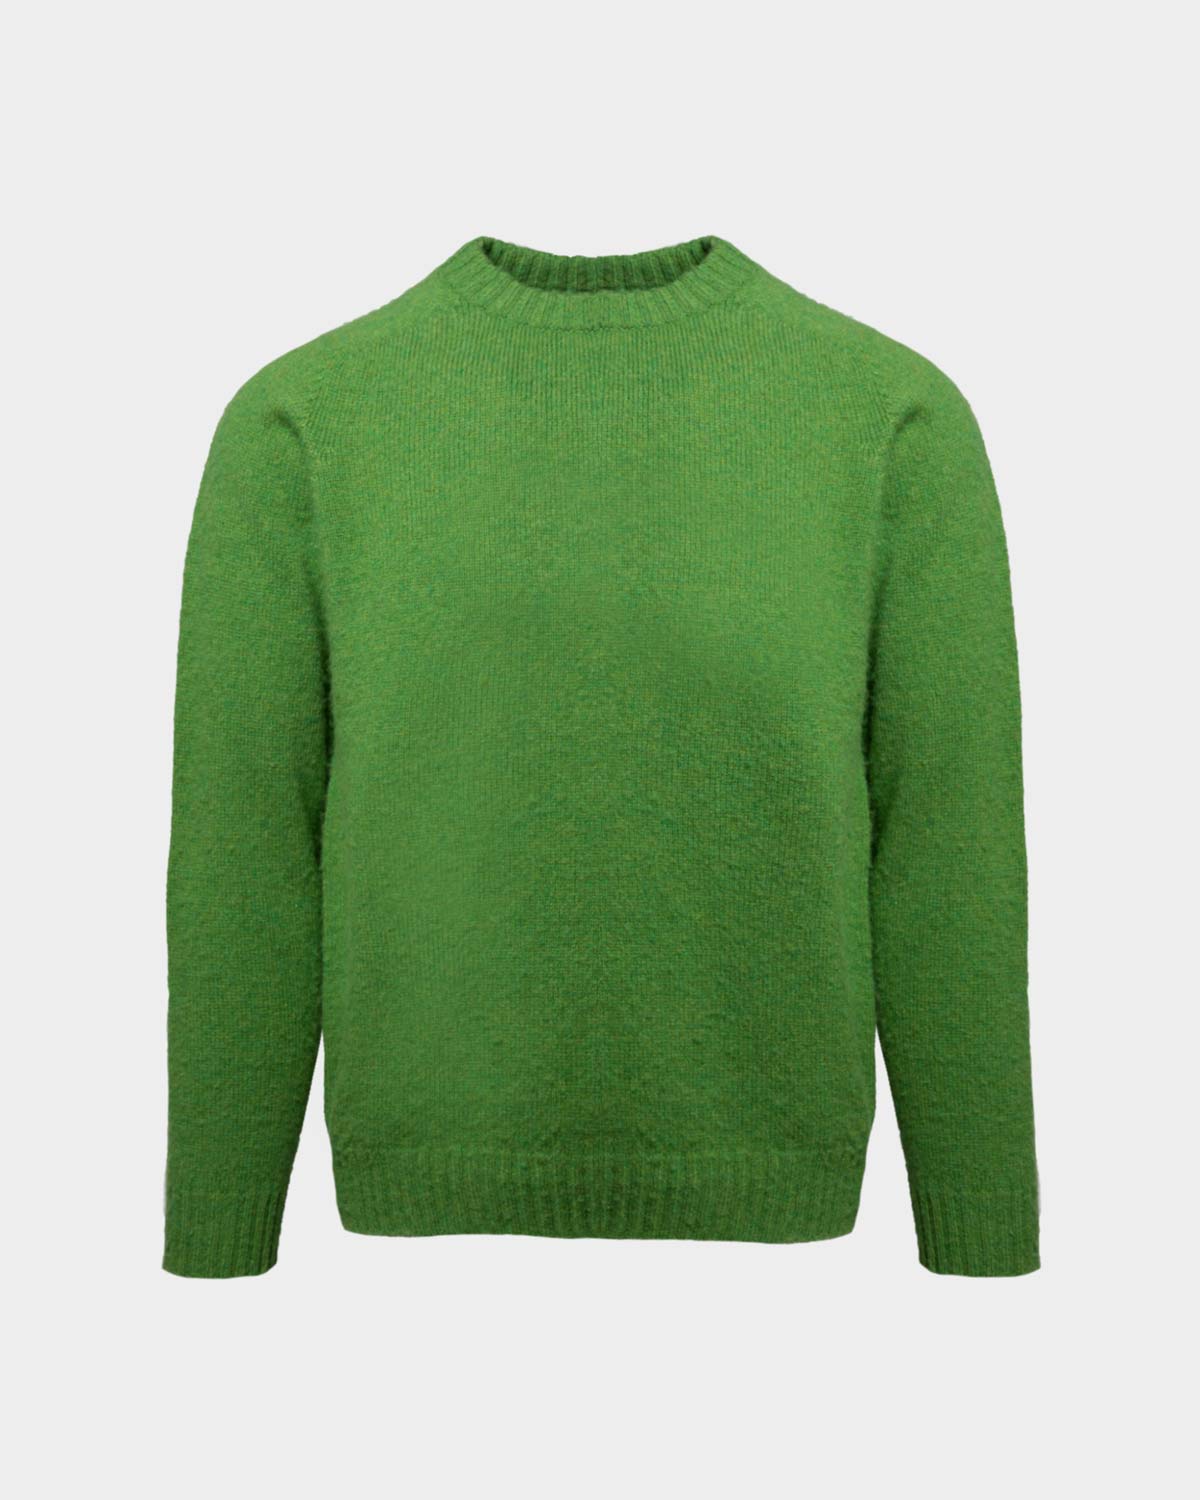 The Knit | ALBAM Boiled Wool Jumper